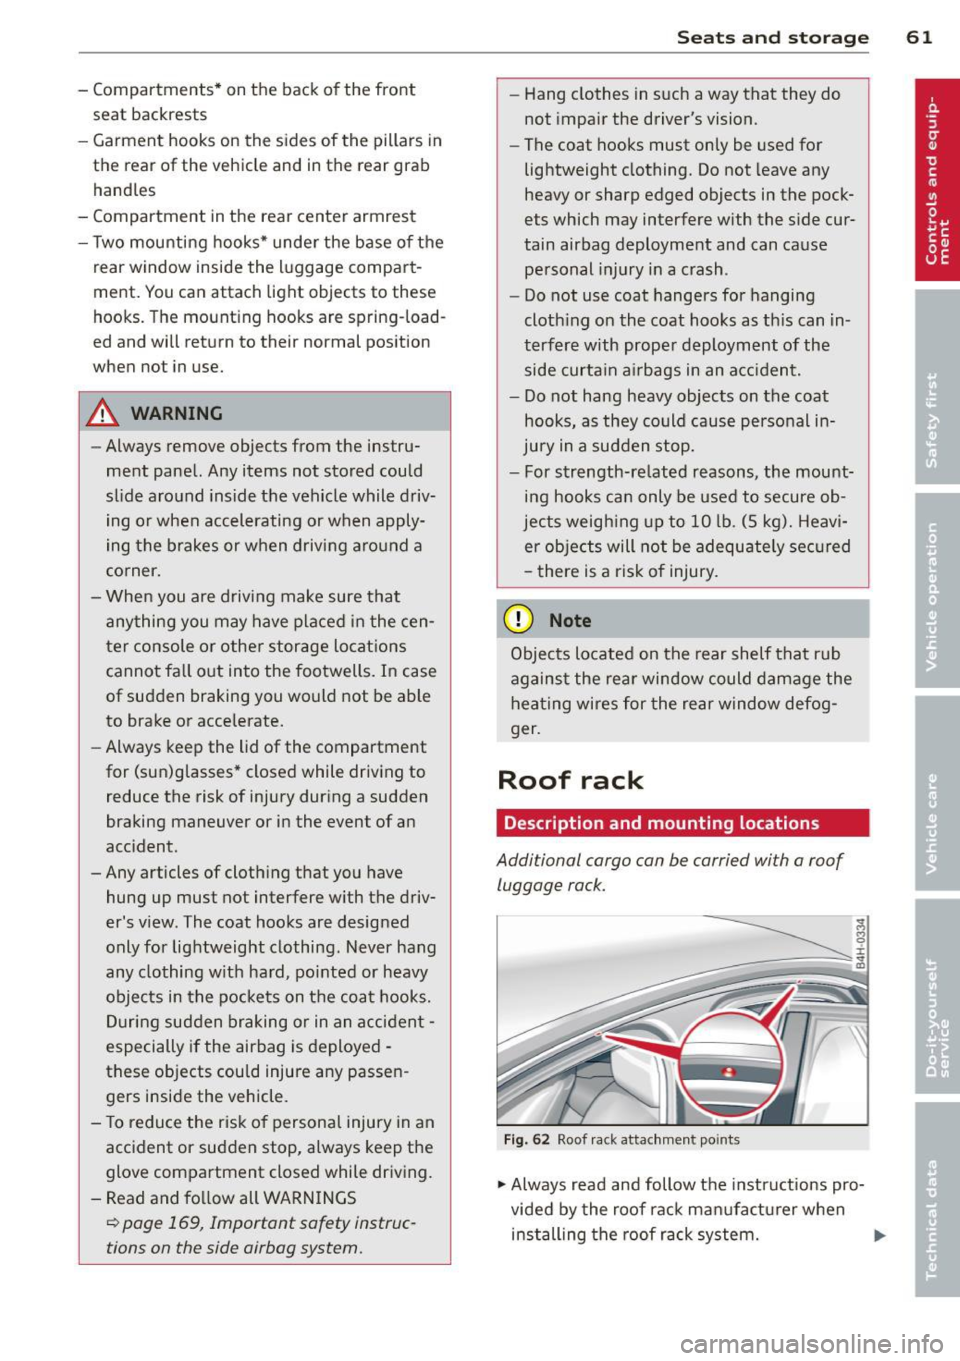 AUDI S6 2014  Owners Manual - Compartments*  on  the  back  of  the  front seat  backrests 
- Garment  hooks  on  the  sides  of  the  pillars  in 
the  rear  of  the  vehicle  and  in the  rear  grab handles 
- Compartment  in 